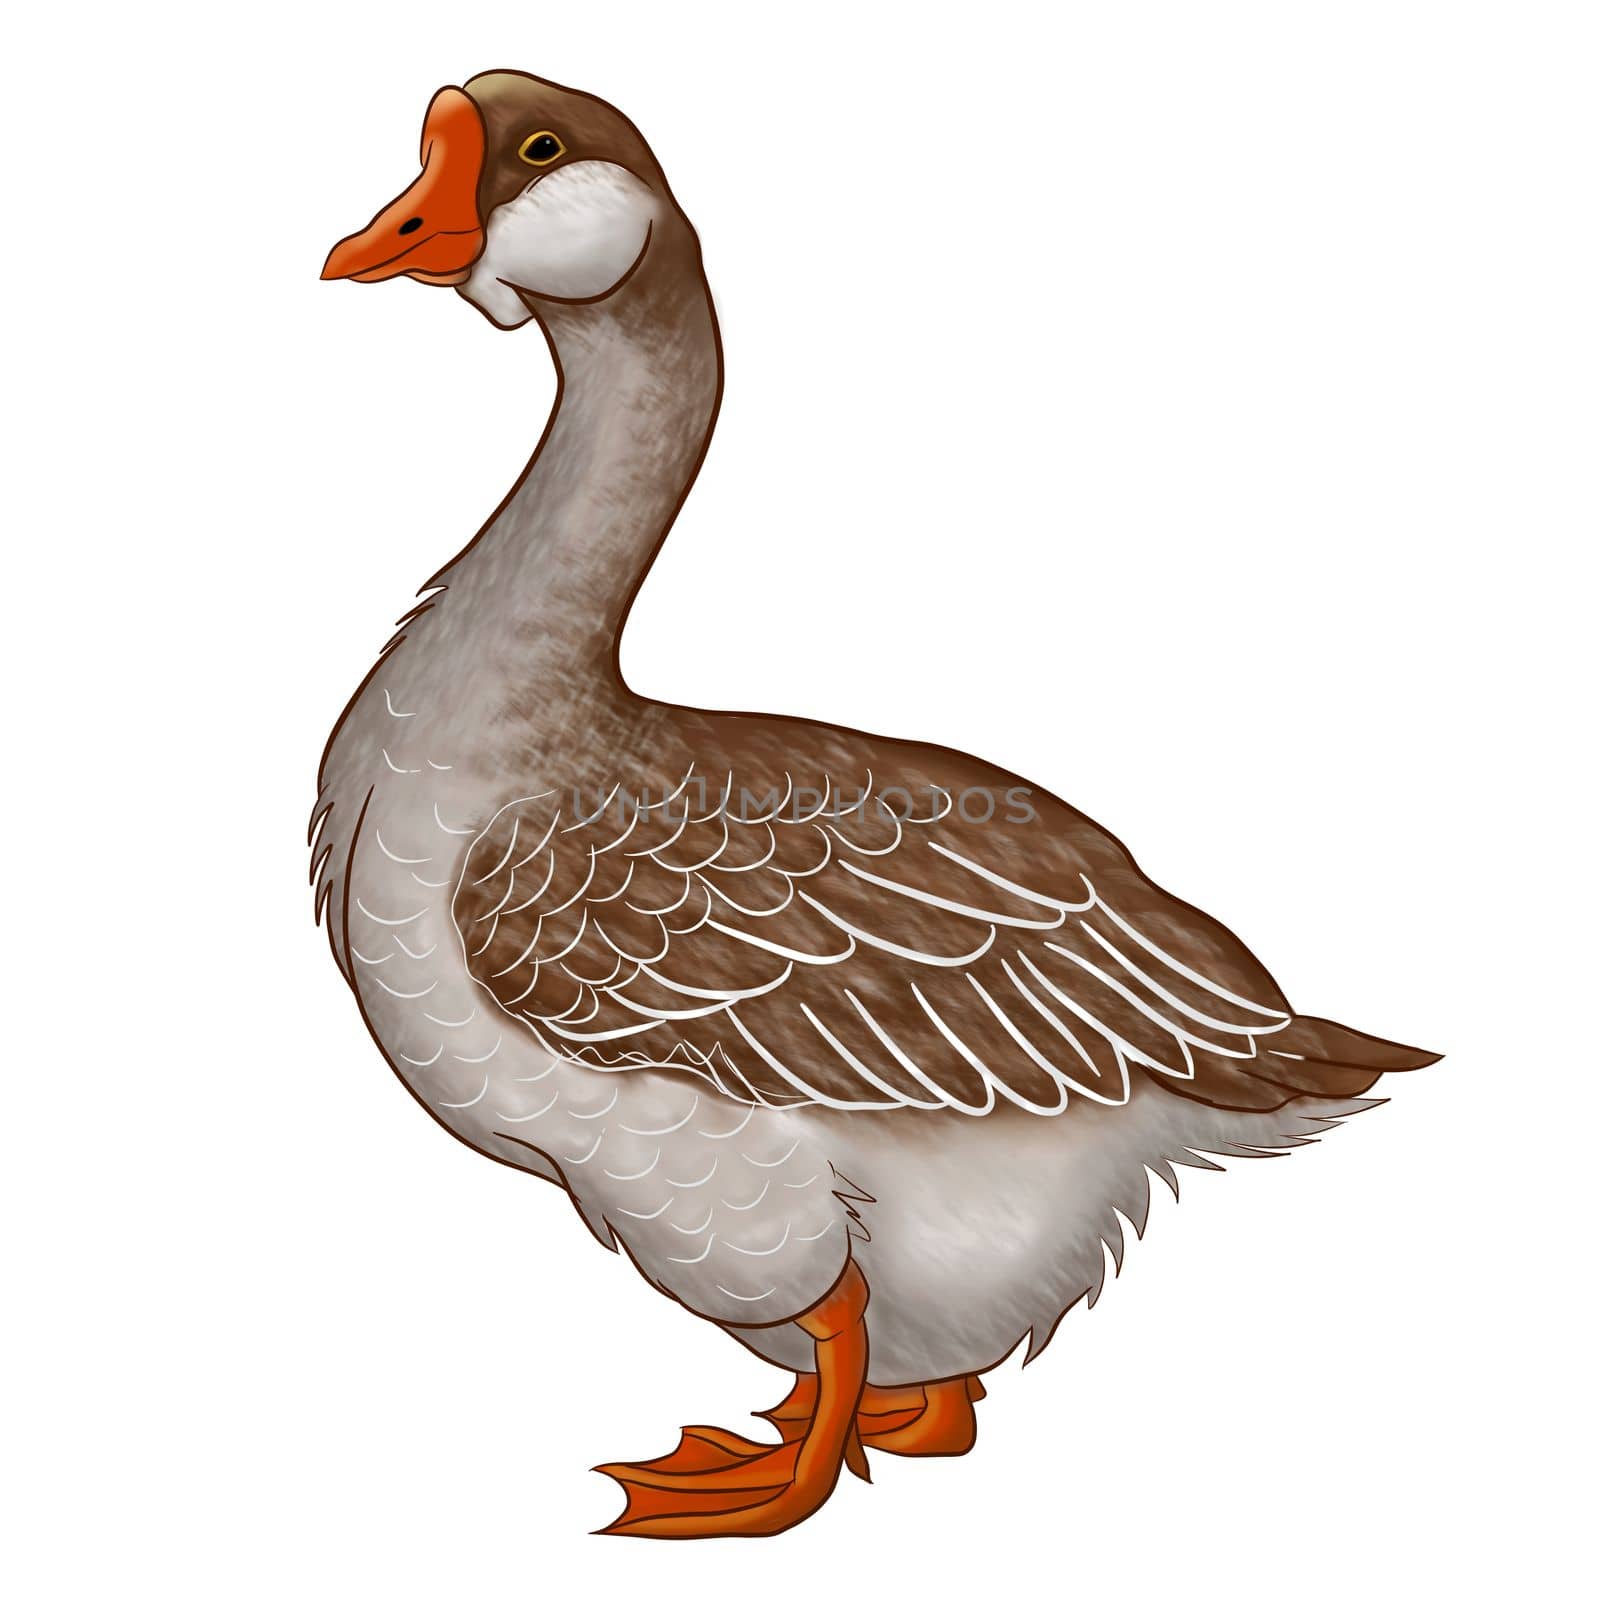 Illustration of a goose on an isolated background. Clip art animals by Alina_Lebed